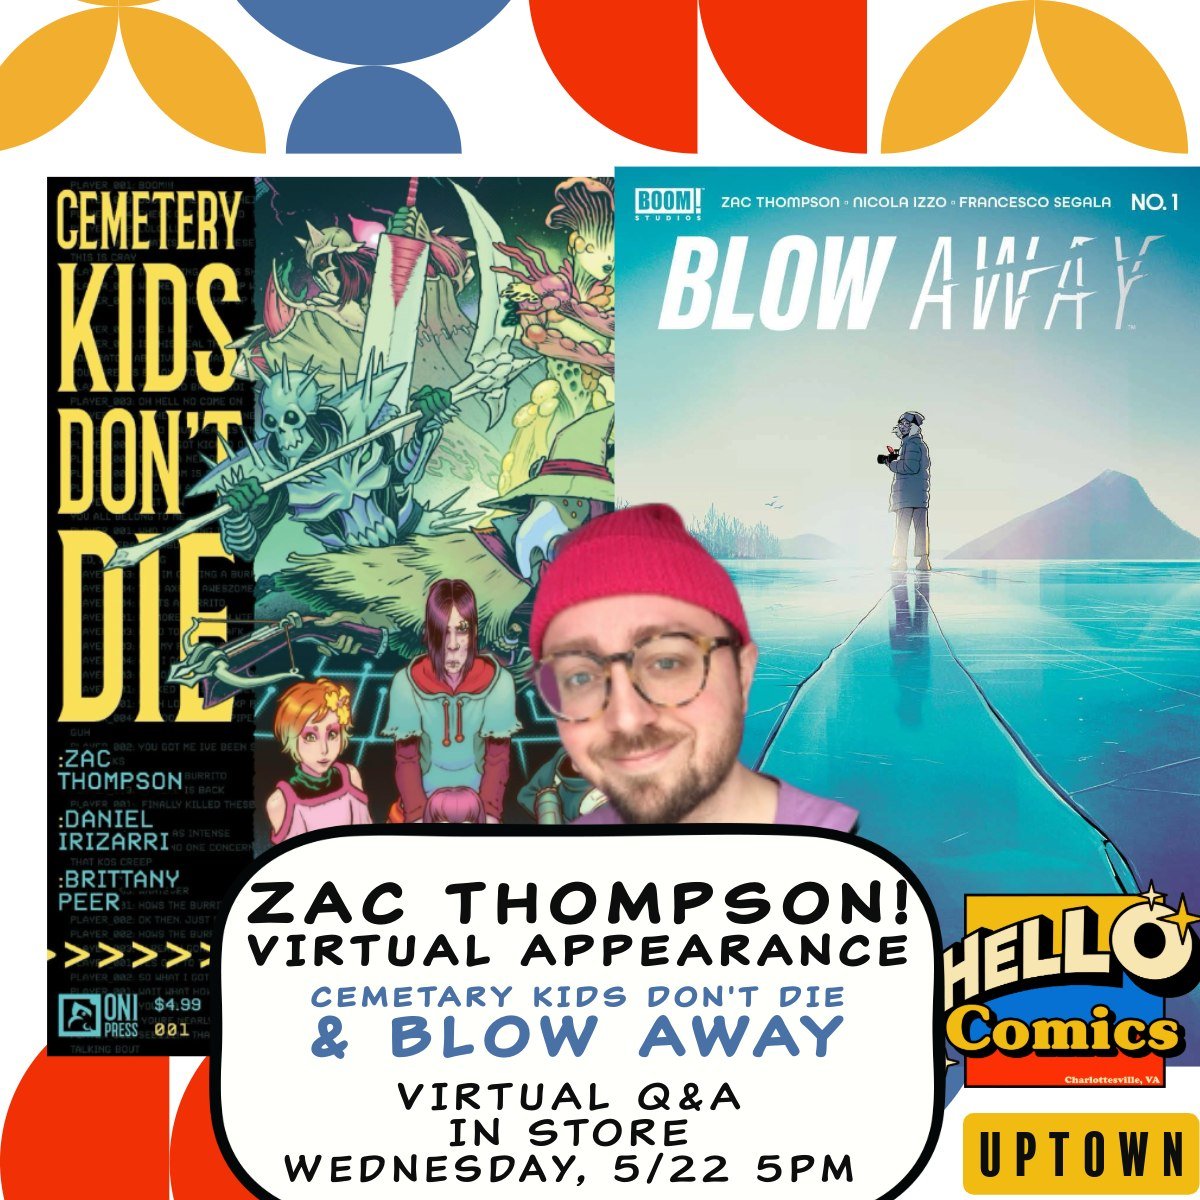 Zac Thompson (CEMETARY KIDS DON&quot;T DIE, BLOW AWAY, INTO THE UNBEING, I BREATHED A BODY, CABLE)  is visiting the Uptown shop (over Zoom!) Wednesday, May 22 5:00-5:30pm. It's the release day for BLOW AWAY #2 - and we loved first issue of the arctic